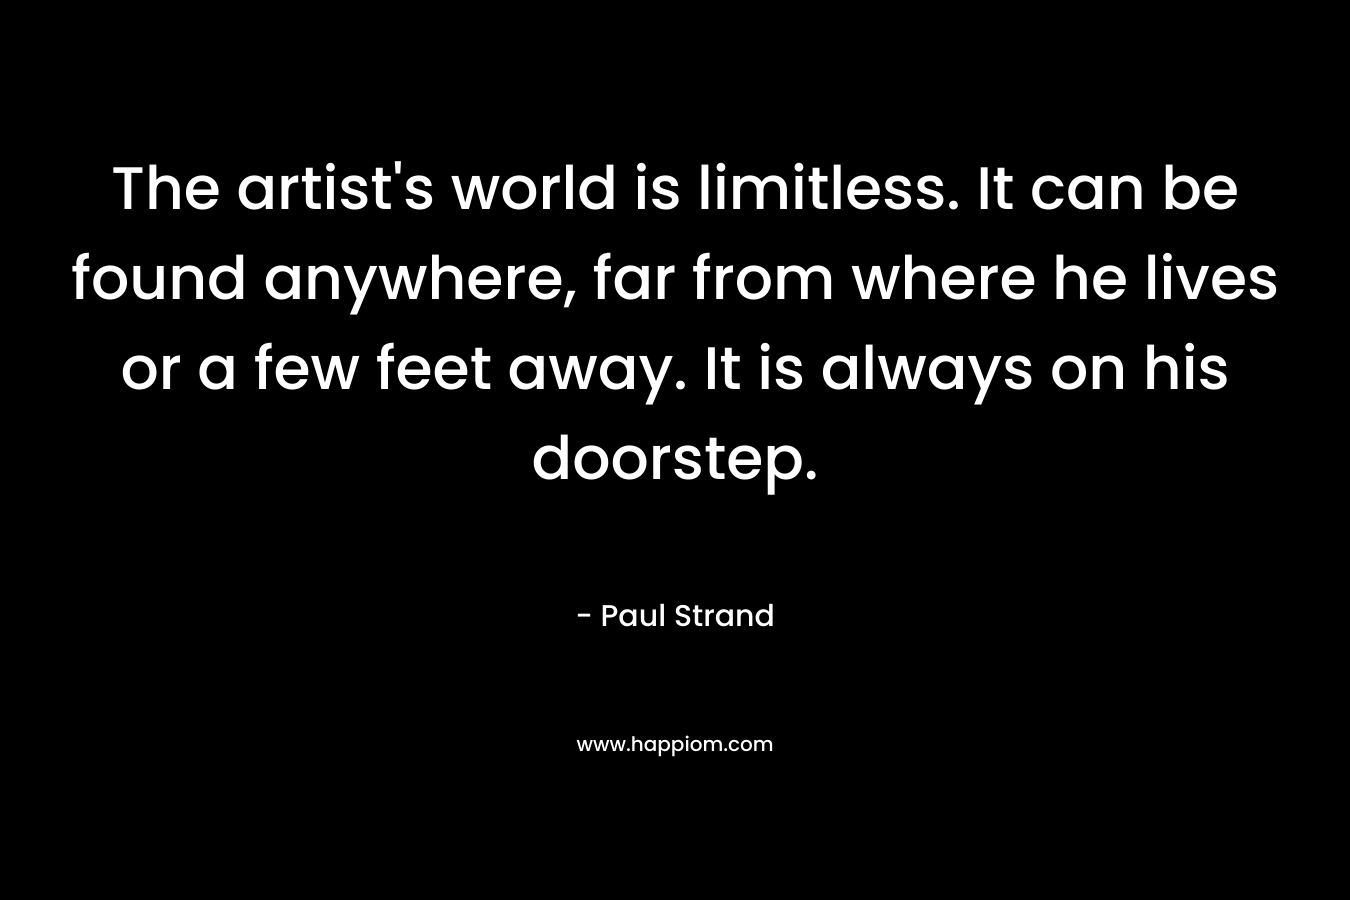 The artist's world is limitless. It can be found anywhere, far from where he lives or a few feet away. It is always on his doorstep. 